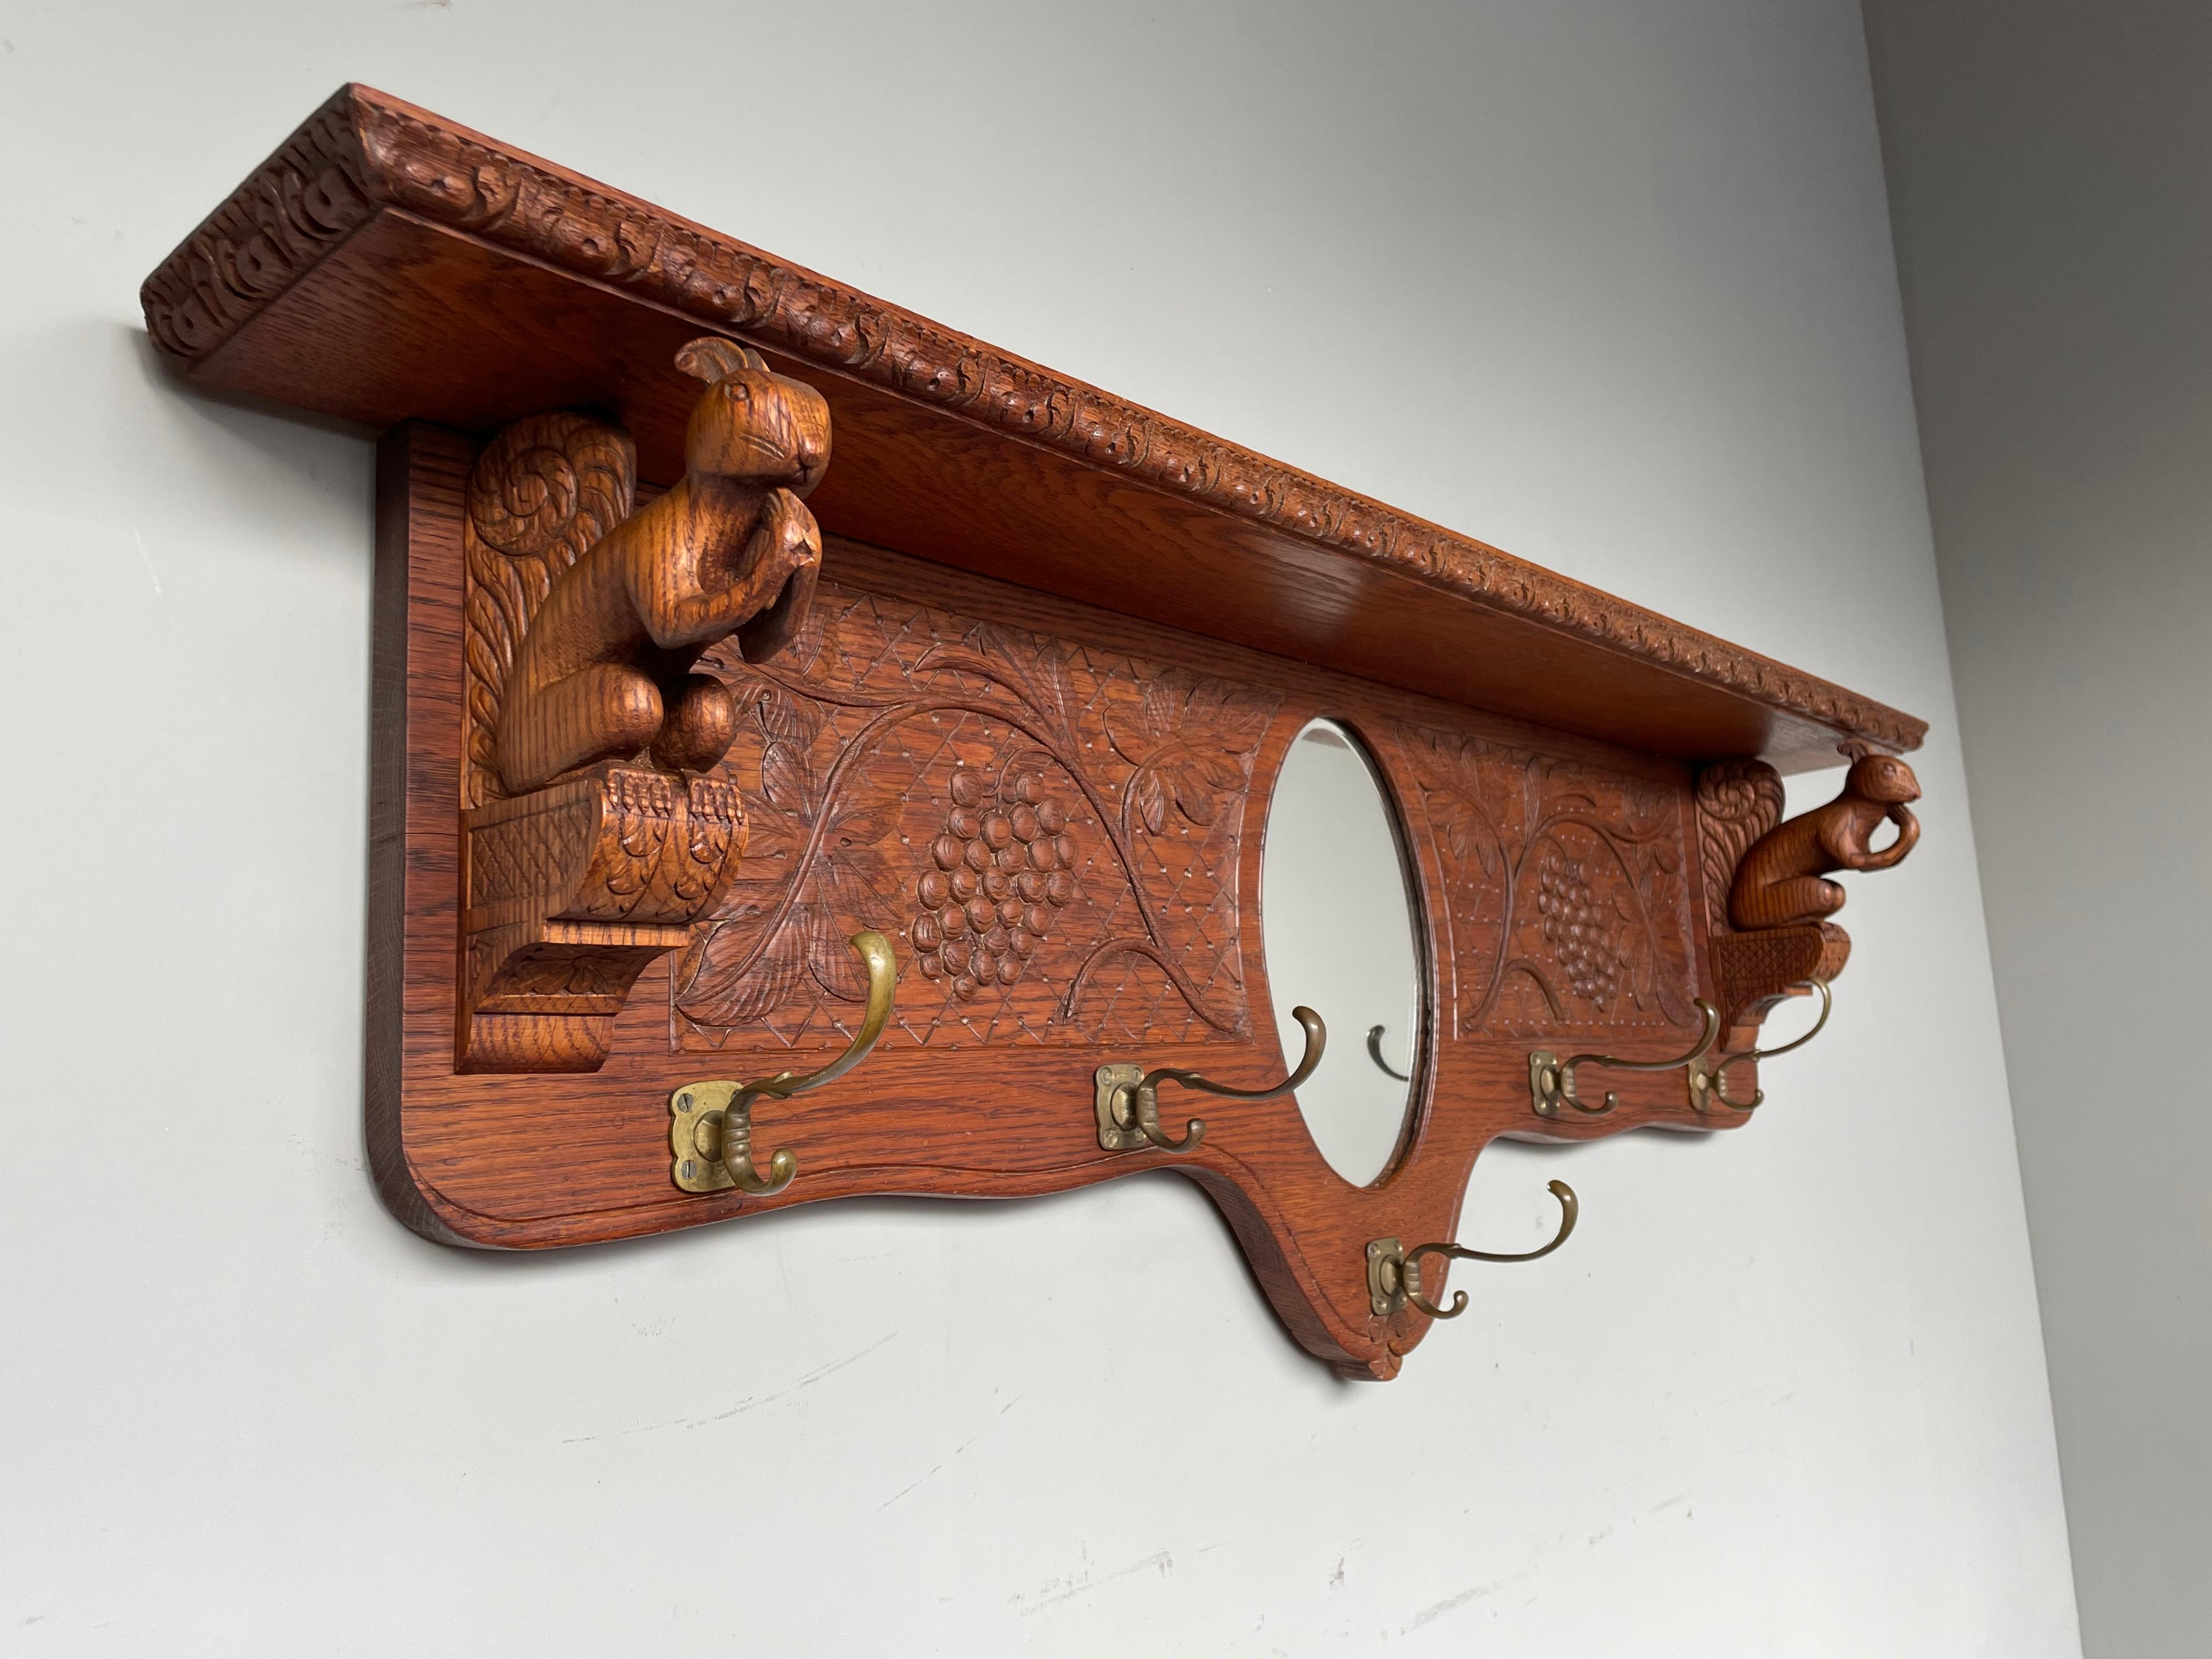 20th Century Antique Hand Carved Arts and Crafts Wall Coat Rack with Squirrel Sculptures